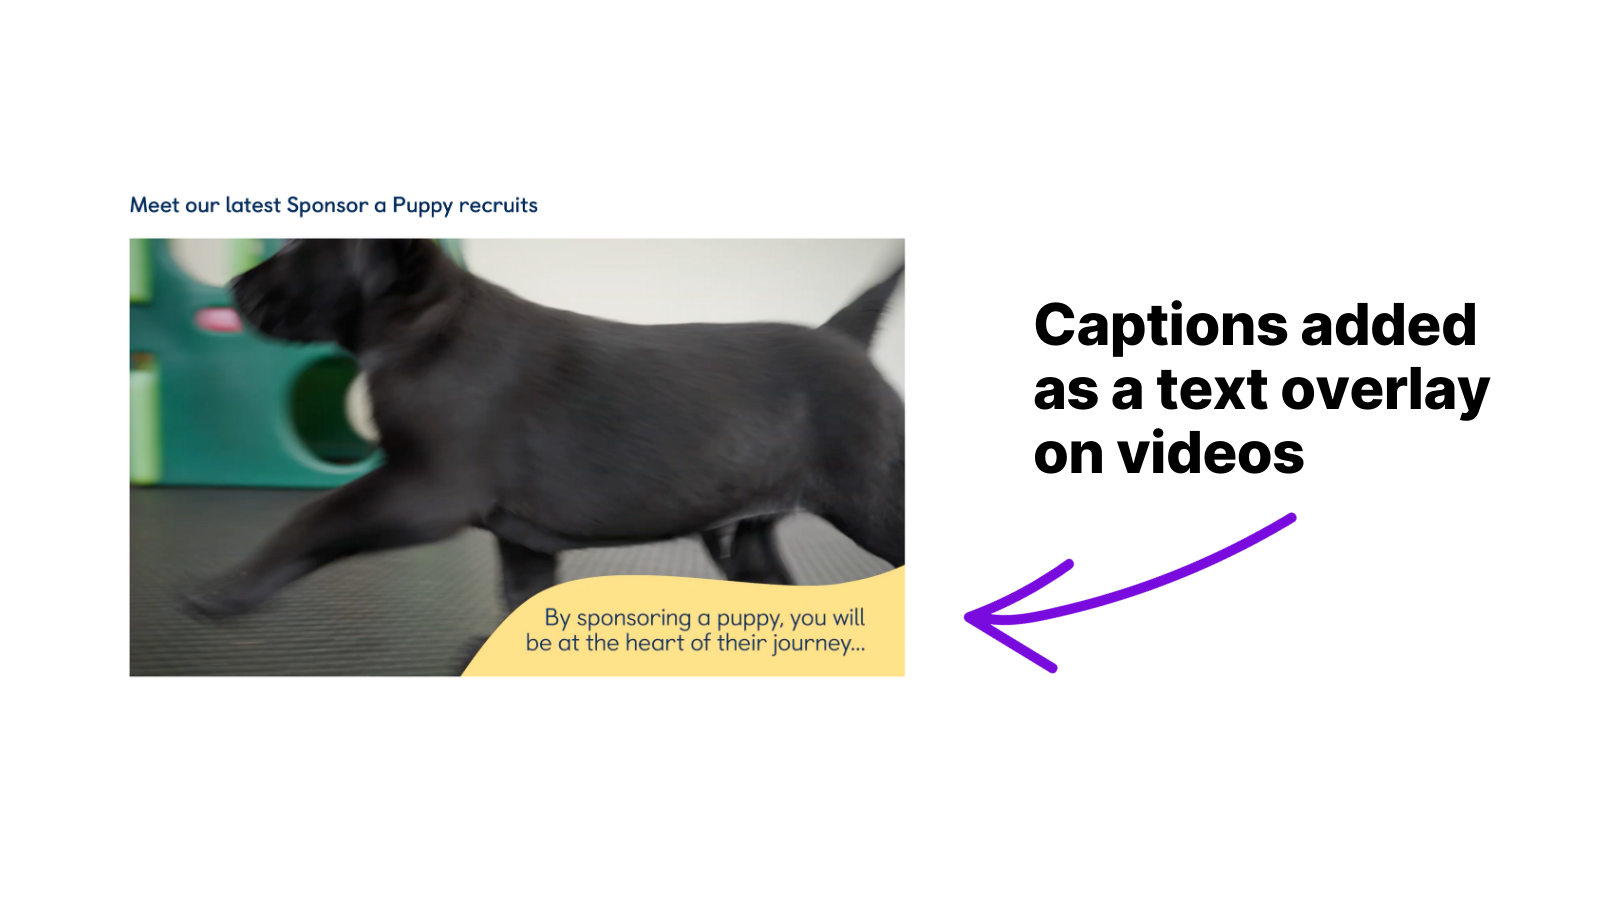 Example image of captions added as a text overlay on videos. This image shows a still image of a video of a black dog walking on a black surface, with an overlay reading "By sponsoring a puppy, you will be at the heart of their journey." 